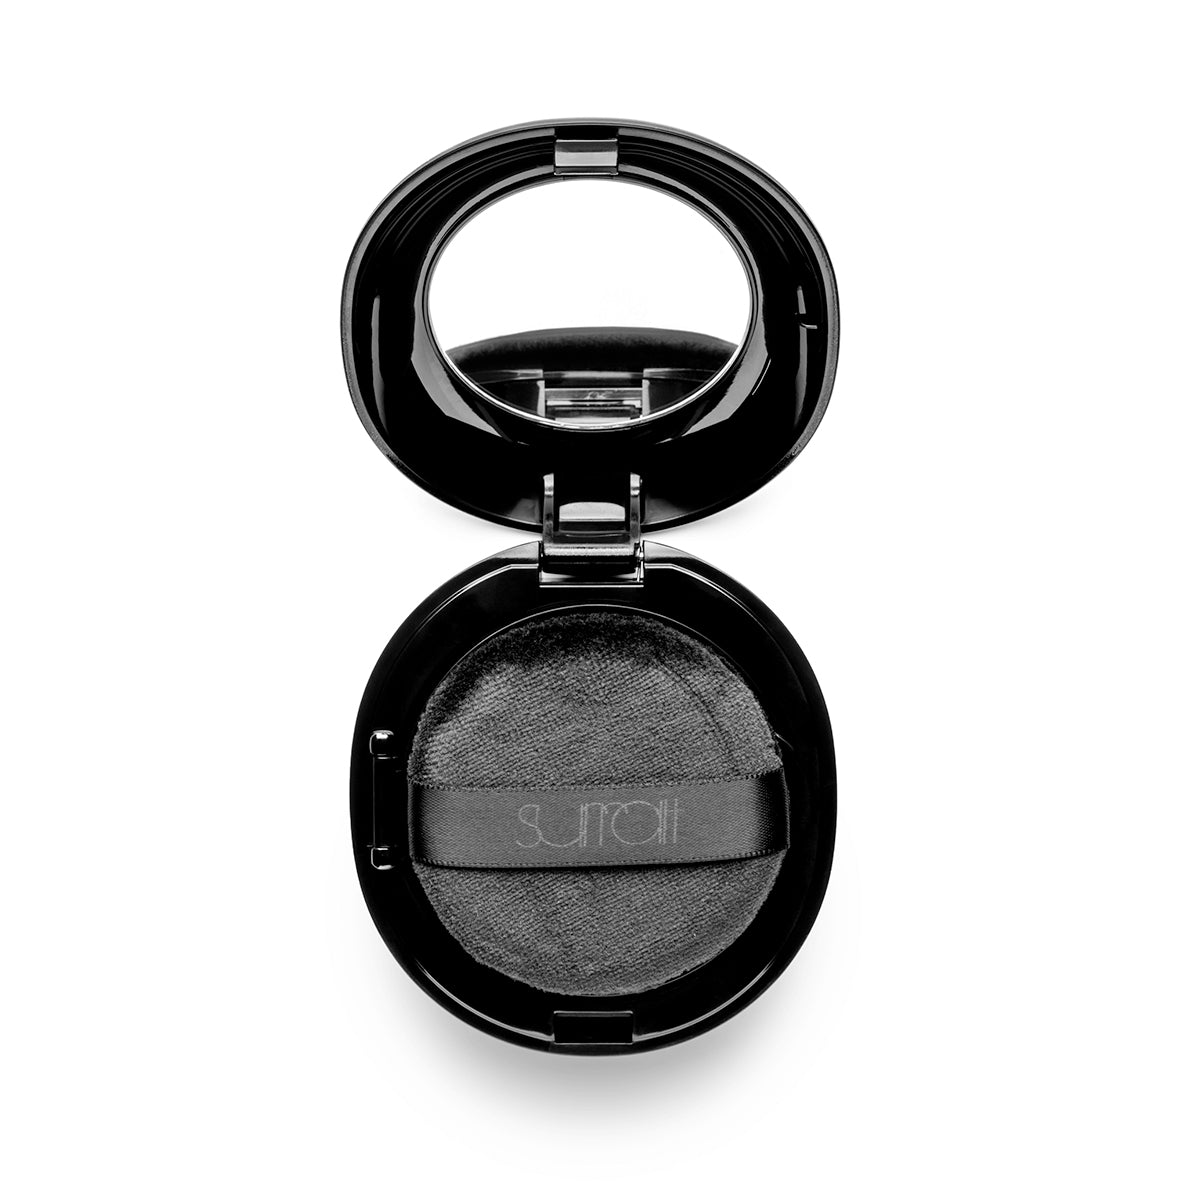 ALLVAR - Loose powder and compact for touchups, blotting and setting makeup